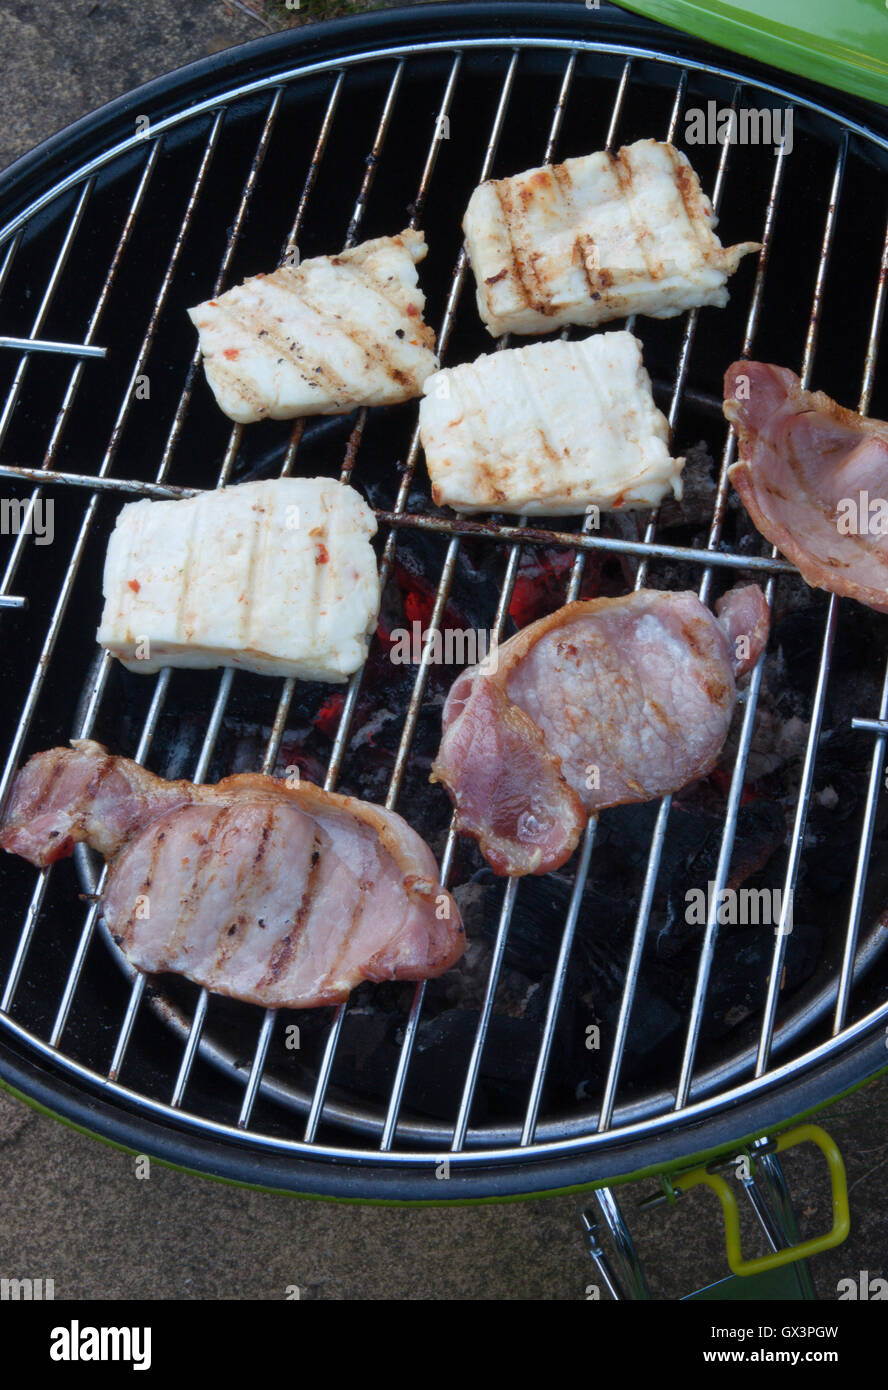 charcoal barbeque with bacon and halloumi grilled food garden summer Stock Photo